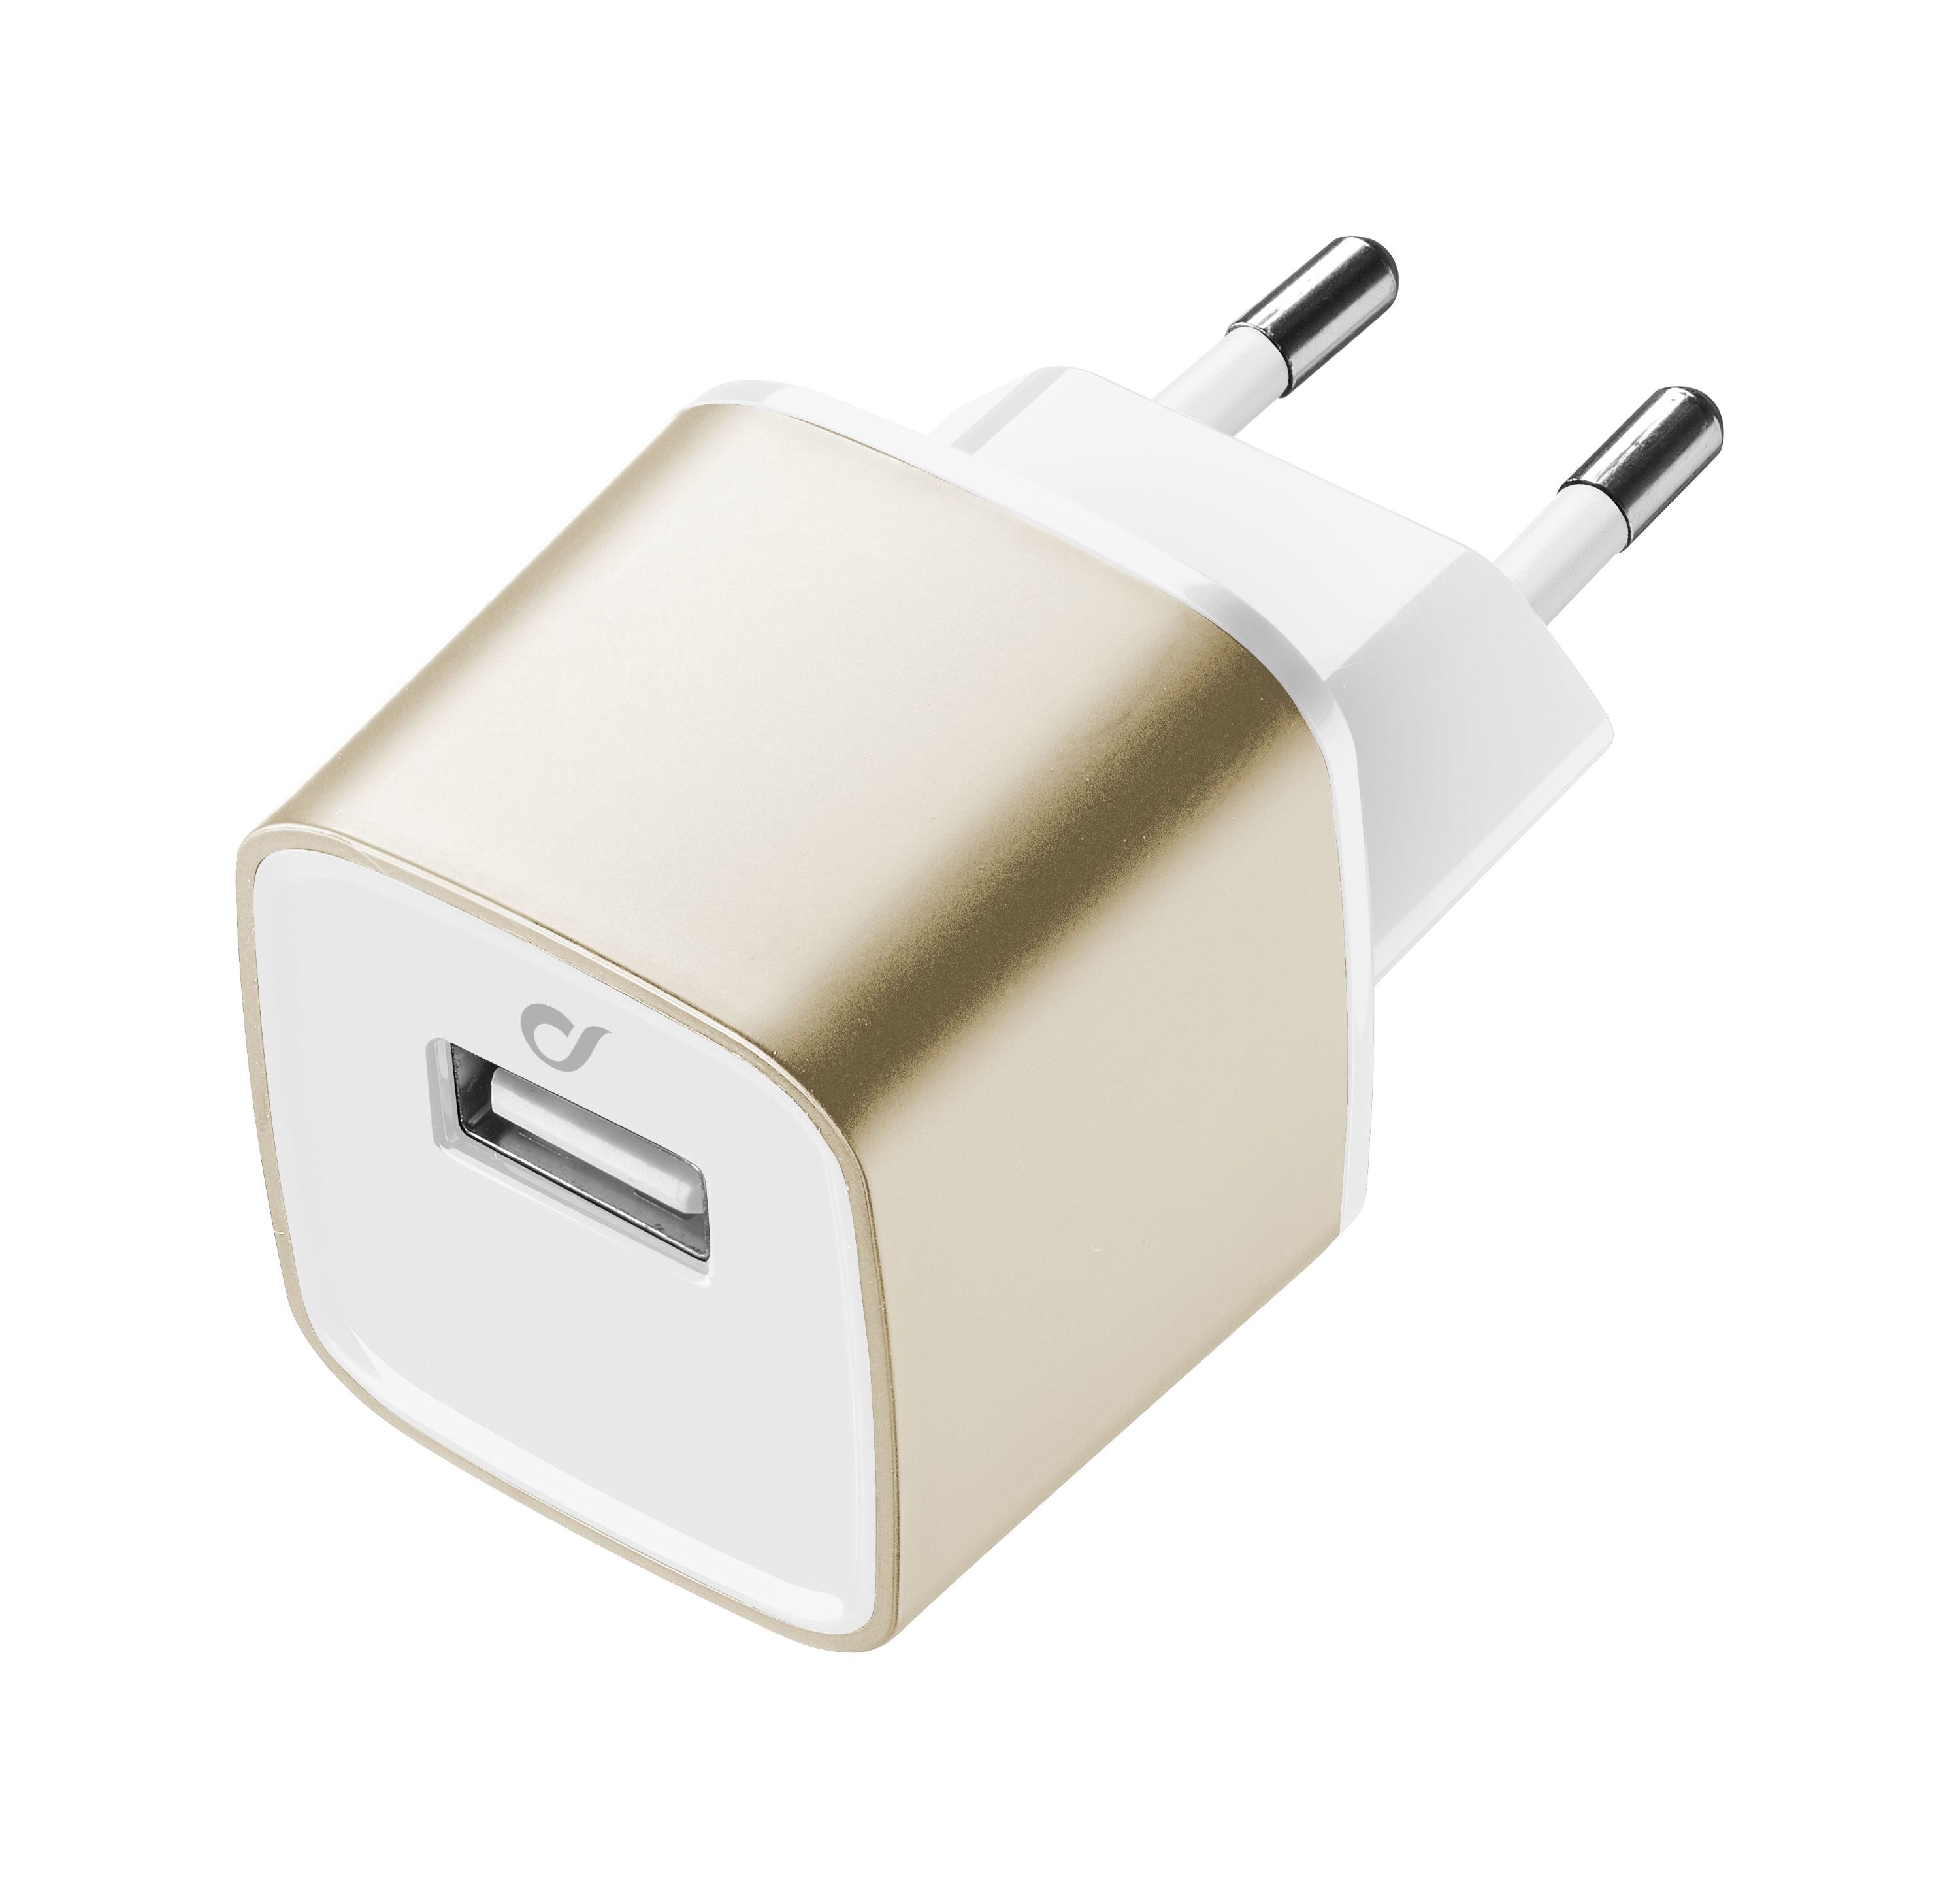 UD travel charger usb, 10W/2A Apple, gold